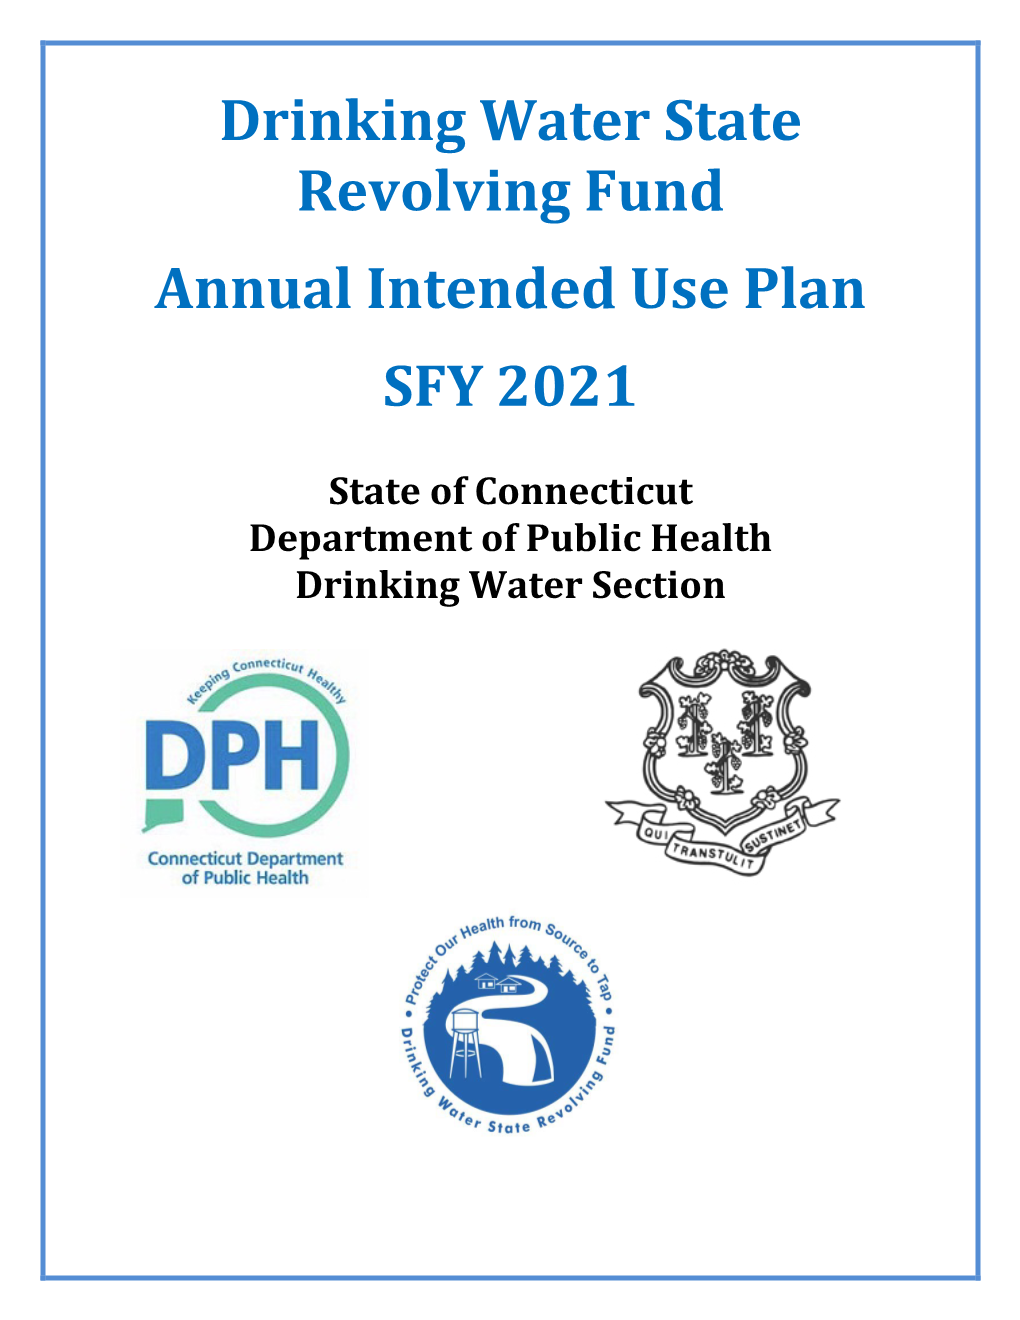 Drinking Water State Revolving Fund Annual Intended Use Plan SFY 2021